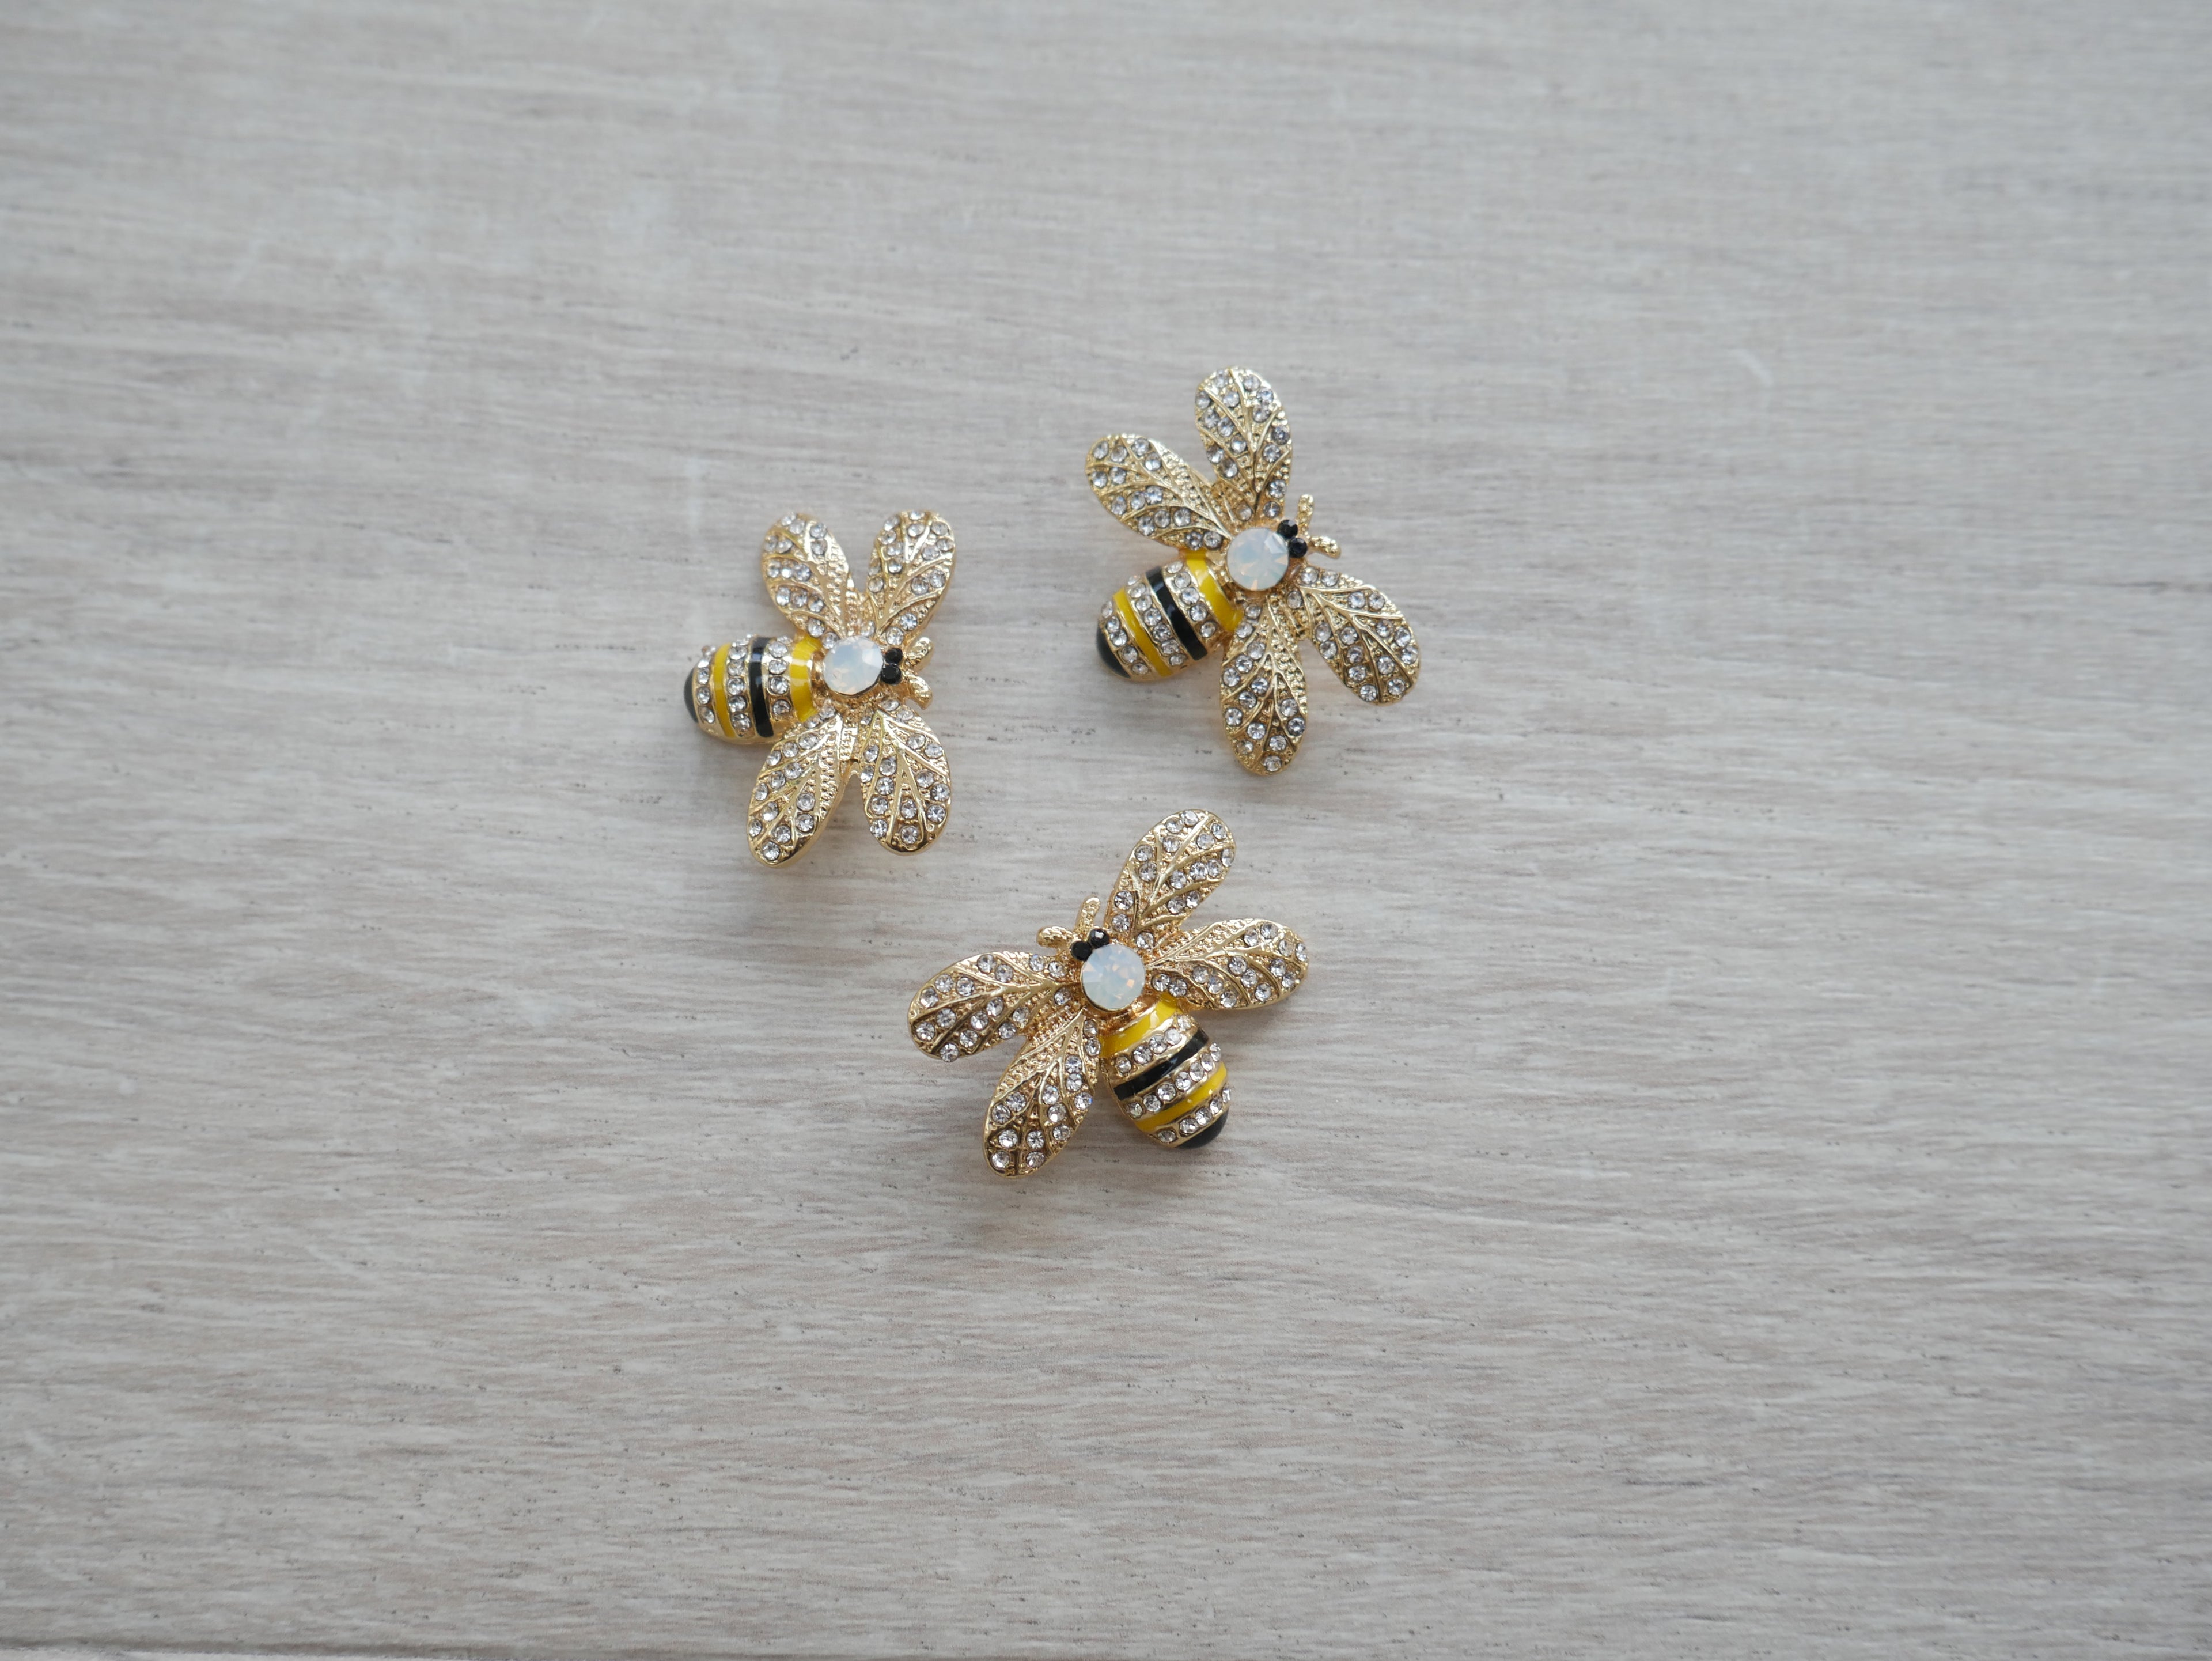 Jewelled Bumble Bee Button-Buttons-Flying Bobbins Haberdashery